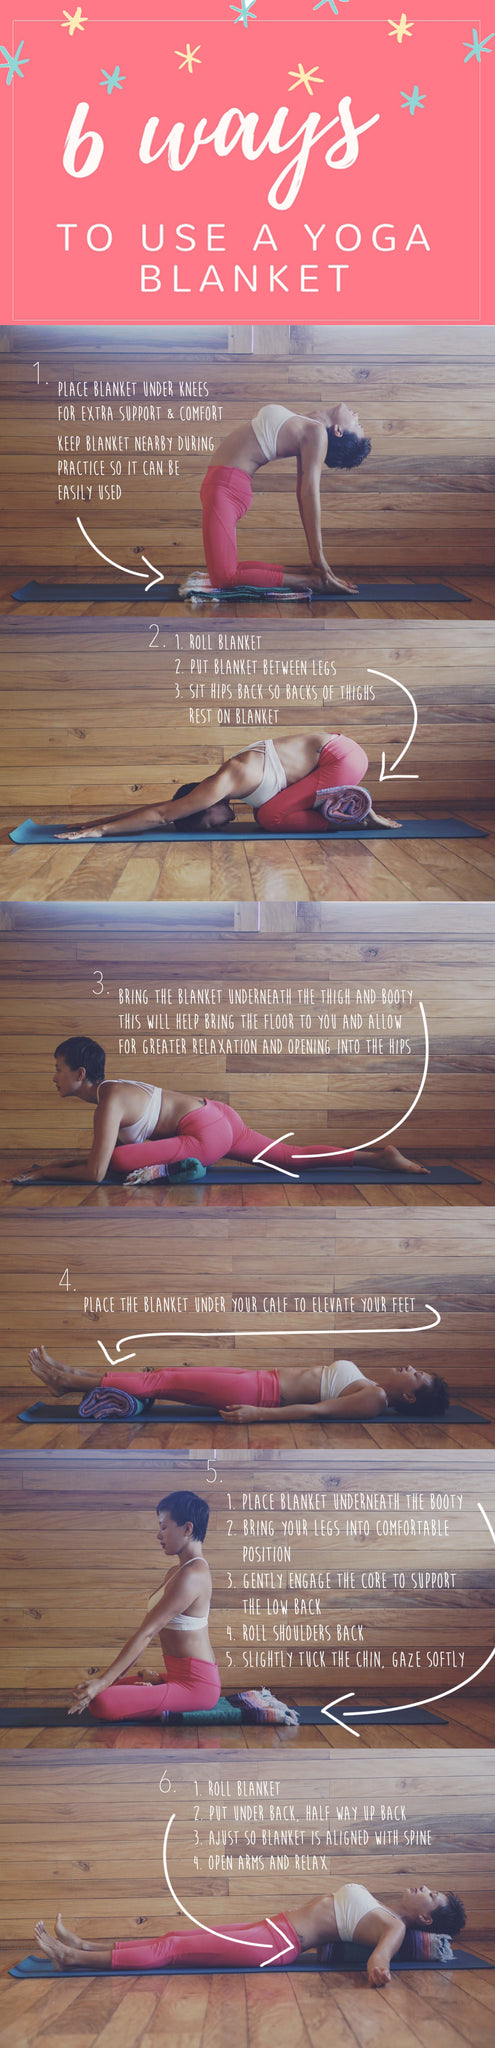 How to use a yoga blanket